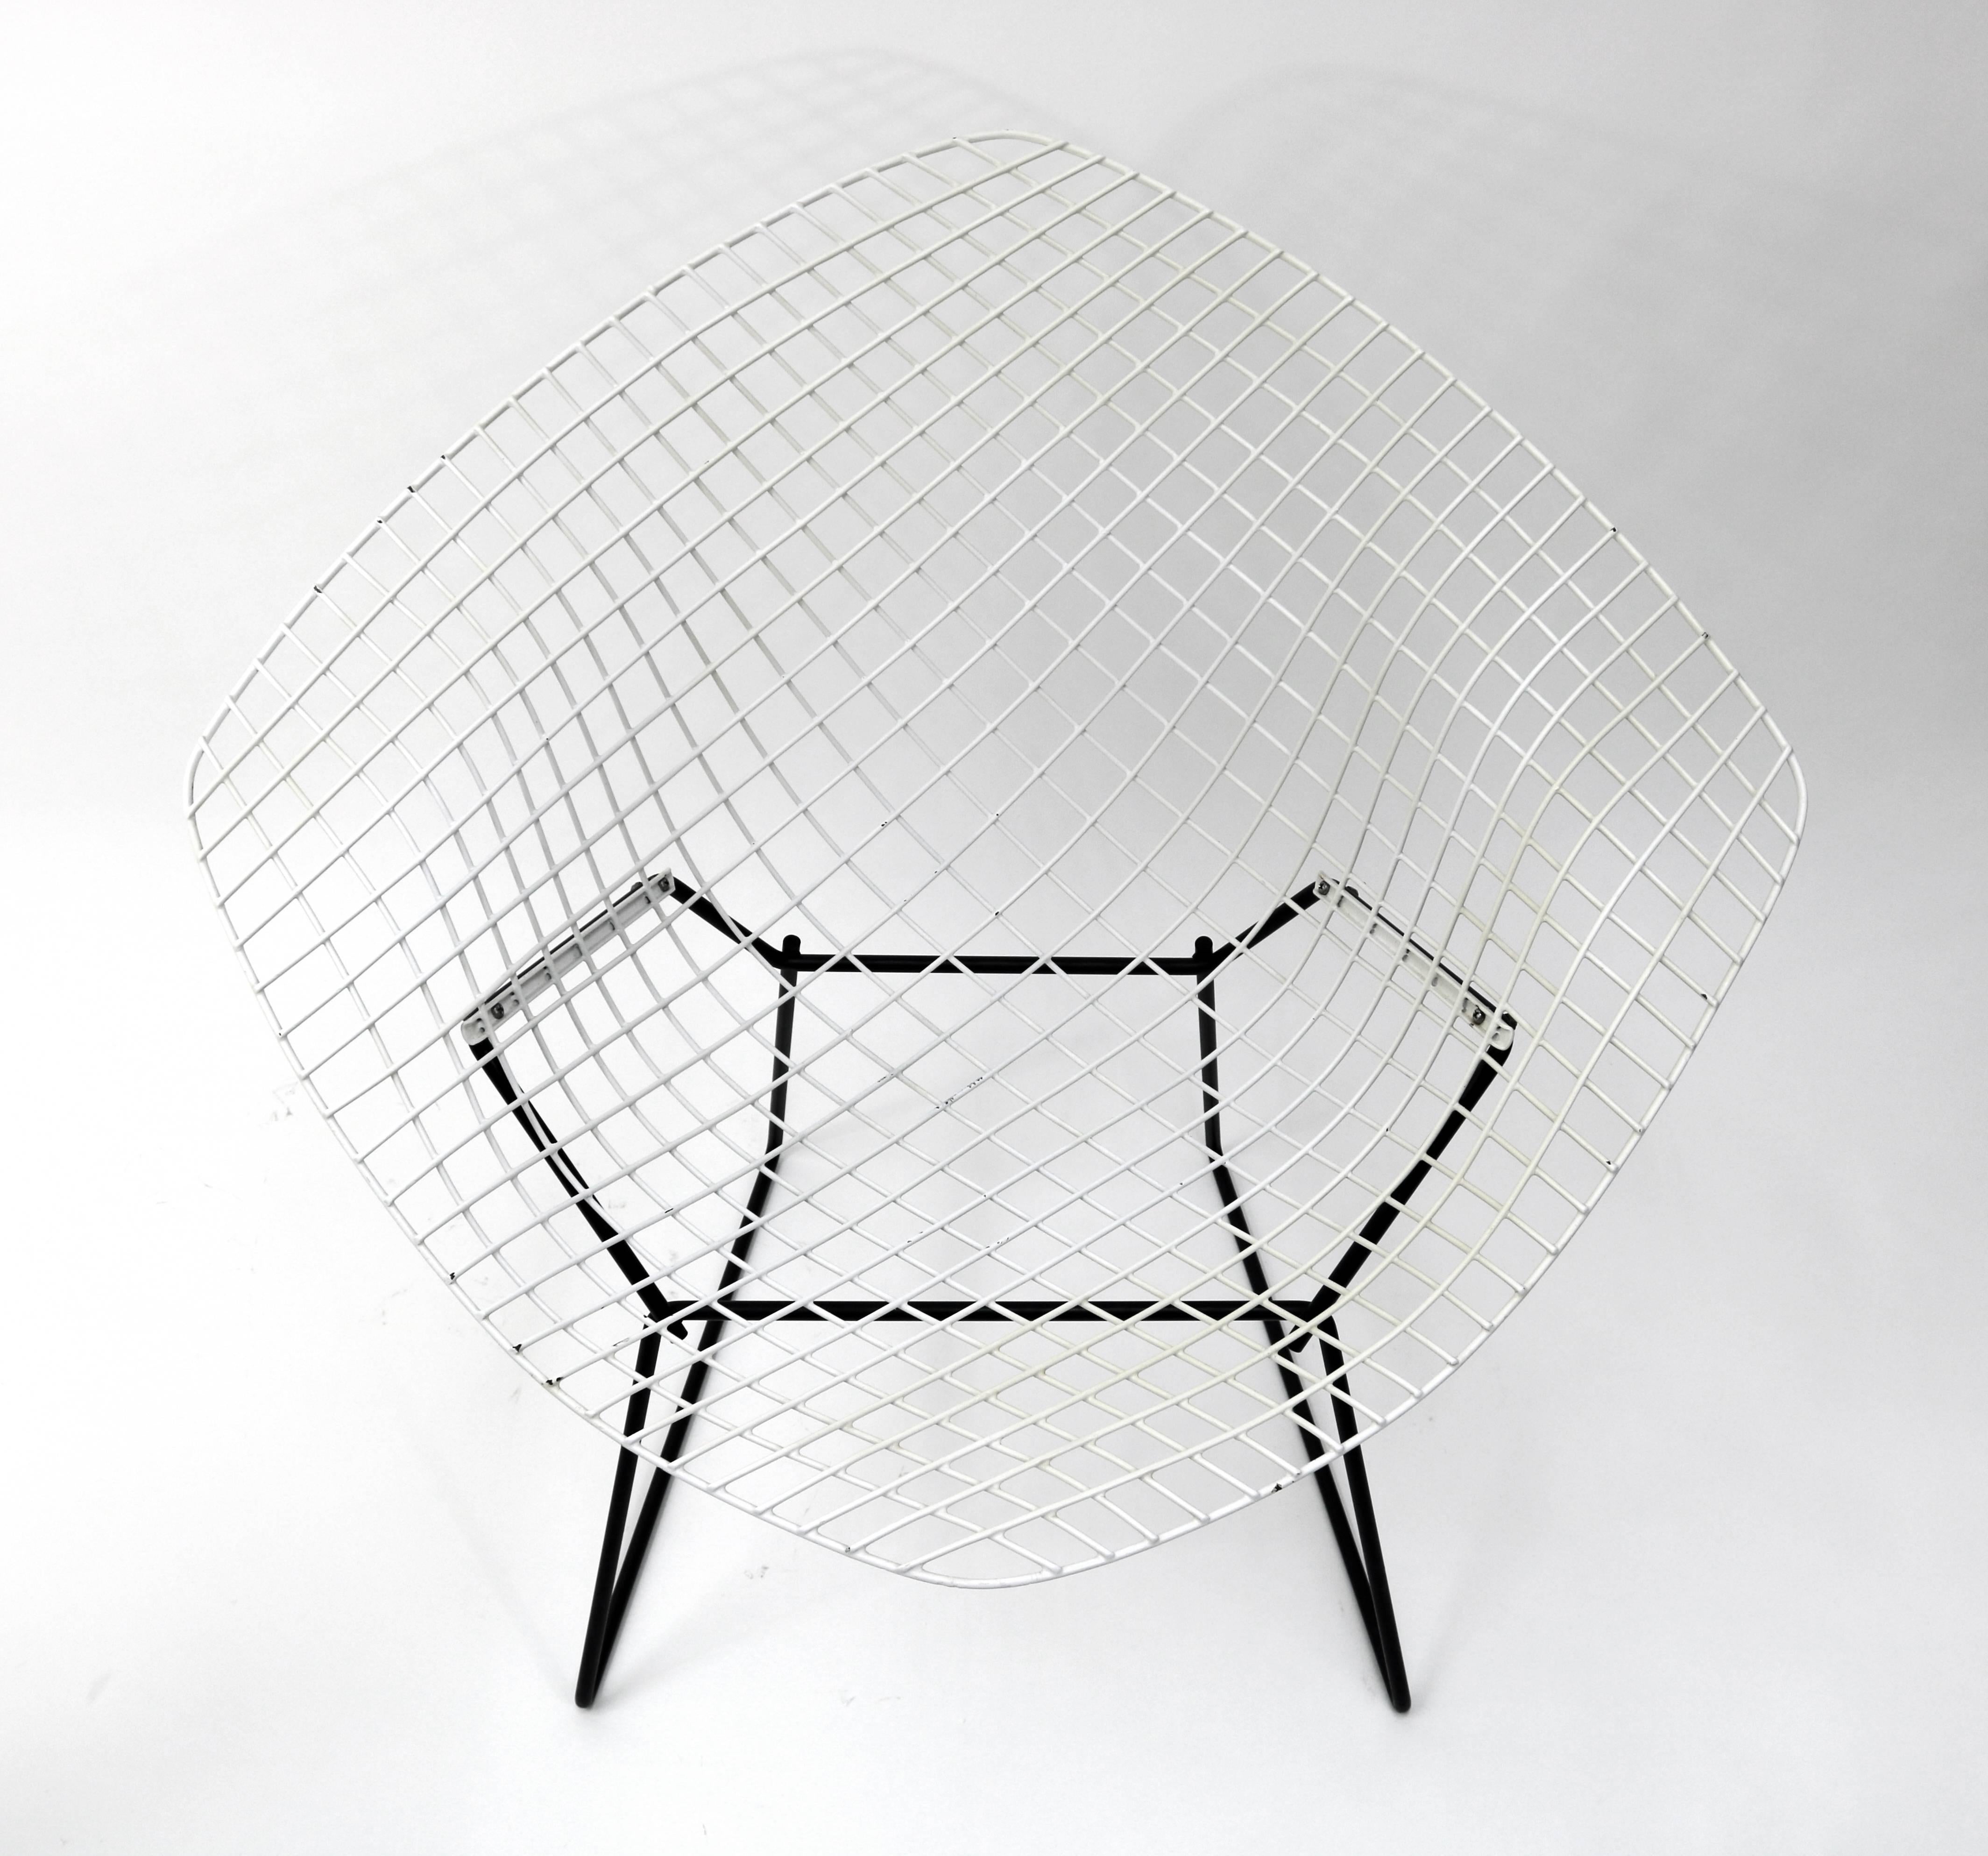 'Diamond' chair designed by Harry Bertoia for Knoll, in white enameled stainless steel on a welded black steel base.

Please note: Pickup for this chair is in Denver, CO.

The diamond chair is, according to Knoll, an astounding study in space,